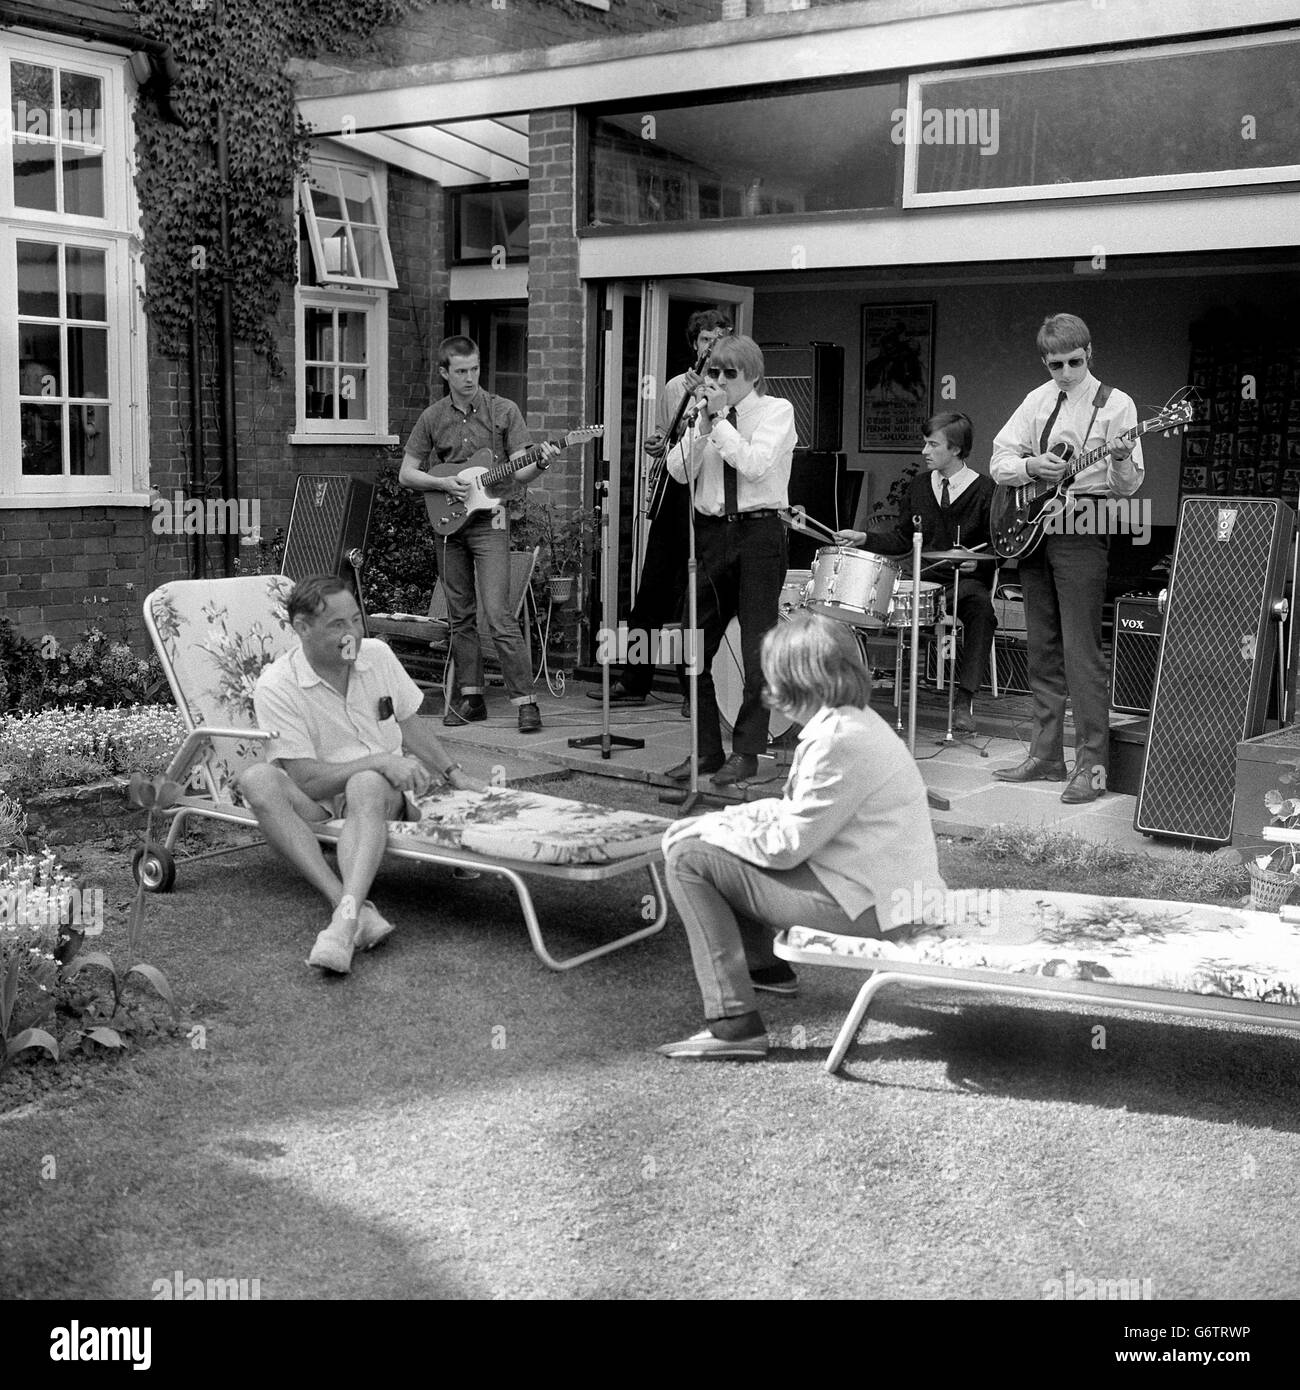 Lord Willis, who recently attacked &#8216;The Beatle Cult&#8217; in a House of Lords speech is pictured with his daughter Sally, as they listen to the Yardbirds in the back garden of his home in Shepherd&#8217;s Green, Chislehurst, Kent. The Yardbirds, a pop-group of five ex-public school boys from the Richmond area of Surrey, had unexpectedly visited Lord Willis to explain &#8216;what pop music is all about&#8217;. Lord Willis, the scriptwriter who created television&#8217;s &#8216;Dixon of Dock Green&#8217; invited them into the garden where he was sunning himself. After a discussion, he Stock Photo